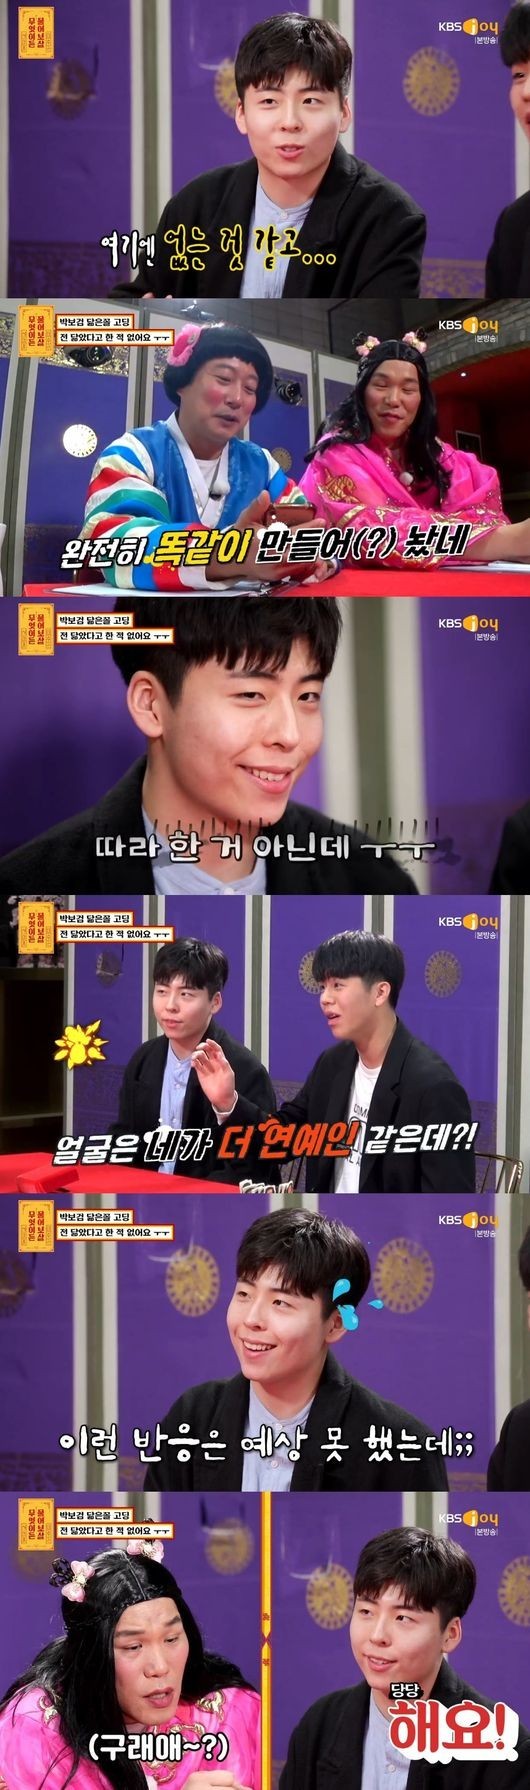 Kim Min-seo, who appeared on the show as Park Bo-gum Similiar, performed plastic surgery.Kim Min-seo posted a video titled Eye correction, Very Rico corrected! Plastic V log! on his YouTube channel.In the video, he said that he was not recommending surgery, but he was talking about the information, and he was consulted and paid by plastic surgeons.Kim Min-seo underwent eye correction and Very Rico surgery on the advice of the Moldmanleb Youtuber Young-Yearple; he was consulted seriously by a specialist, saying his eyes looked blurry.I decided to get a fat relocation under the eyes in the jaw filler, and the swelling immediately after the surgery was revealed.From the day of surgery, he recorded the video from the moment he pulled the stitches and played with fans, Gong Yoo. He also ate pumpkin juice, saying extracting the middle swelling.The moment of disinfection of the wound and the process of removing the cotton and splints are being released as a video and collecting hot topics.Im getting a little bit of a chin line, because I got a jaw filler. Im still bruised, but Ill play the video on the 14th.Very Rico was a complex, but the line became natural. Kim Min-seo, who was born in 2002, made headlines on KBS Joys Ask Anything broadcast in May, complaining that he is suffering from Park Bo-gum Similiar unintentionally.People have been struggling to spread photos on SNS.However, after the broadcast, some netizens ridicule and evil continued, Kim Min-seo explained, I was not in good shape the other day, so I was not swelling my face and was not in a hurry.He also added, I sue all the evil!image capture